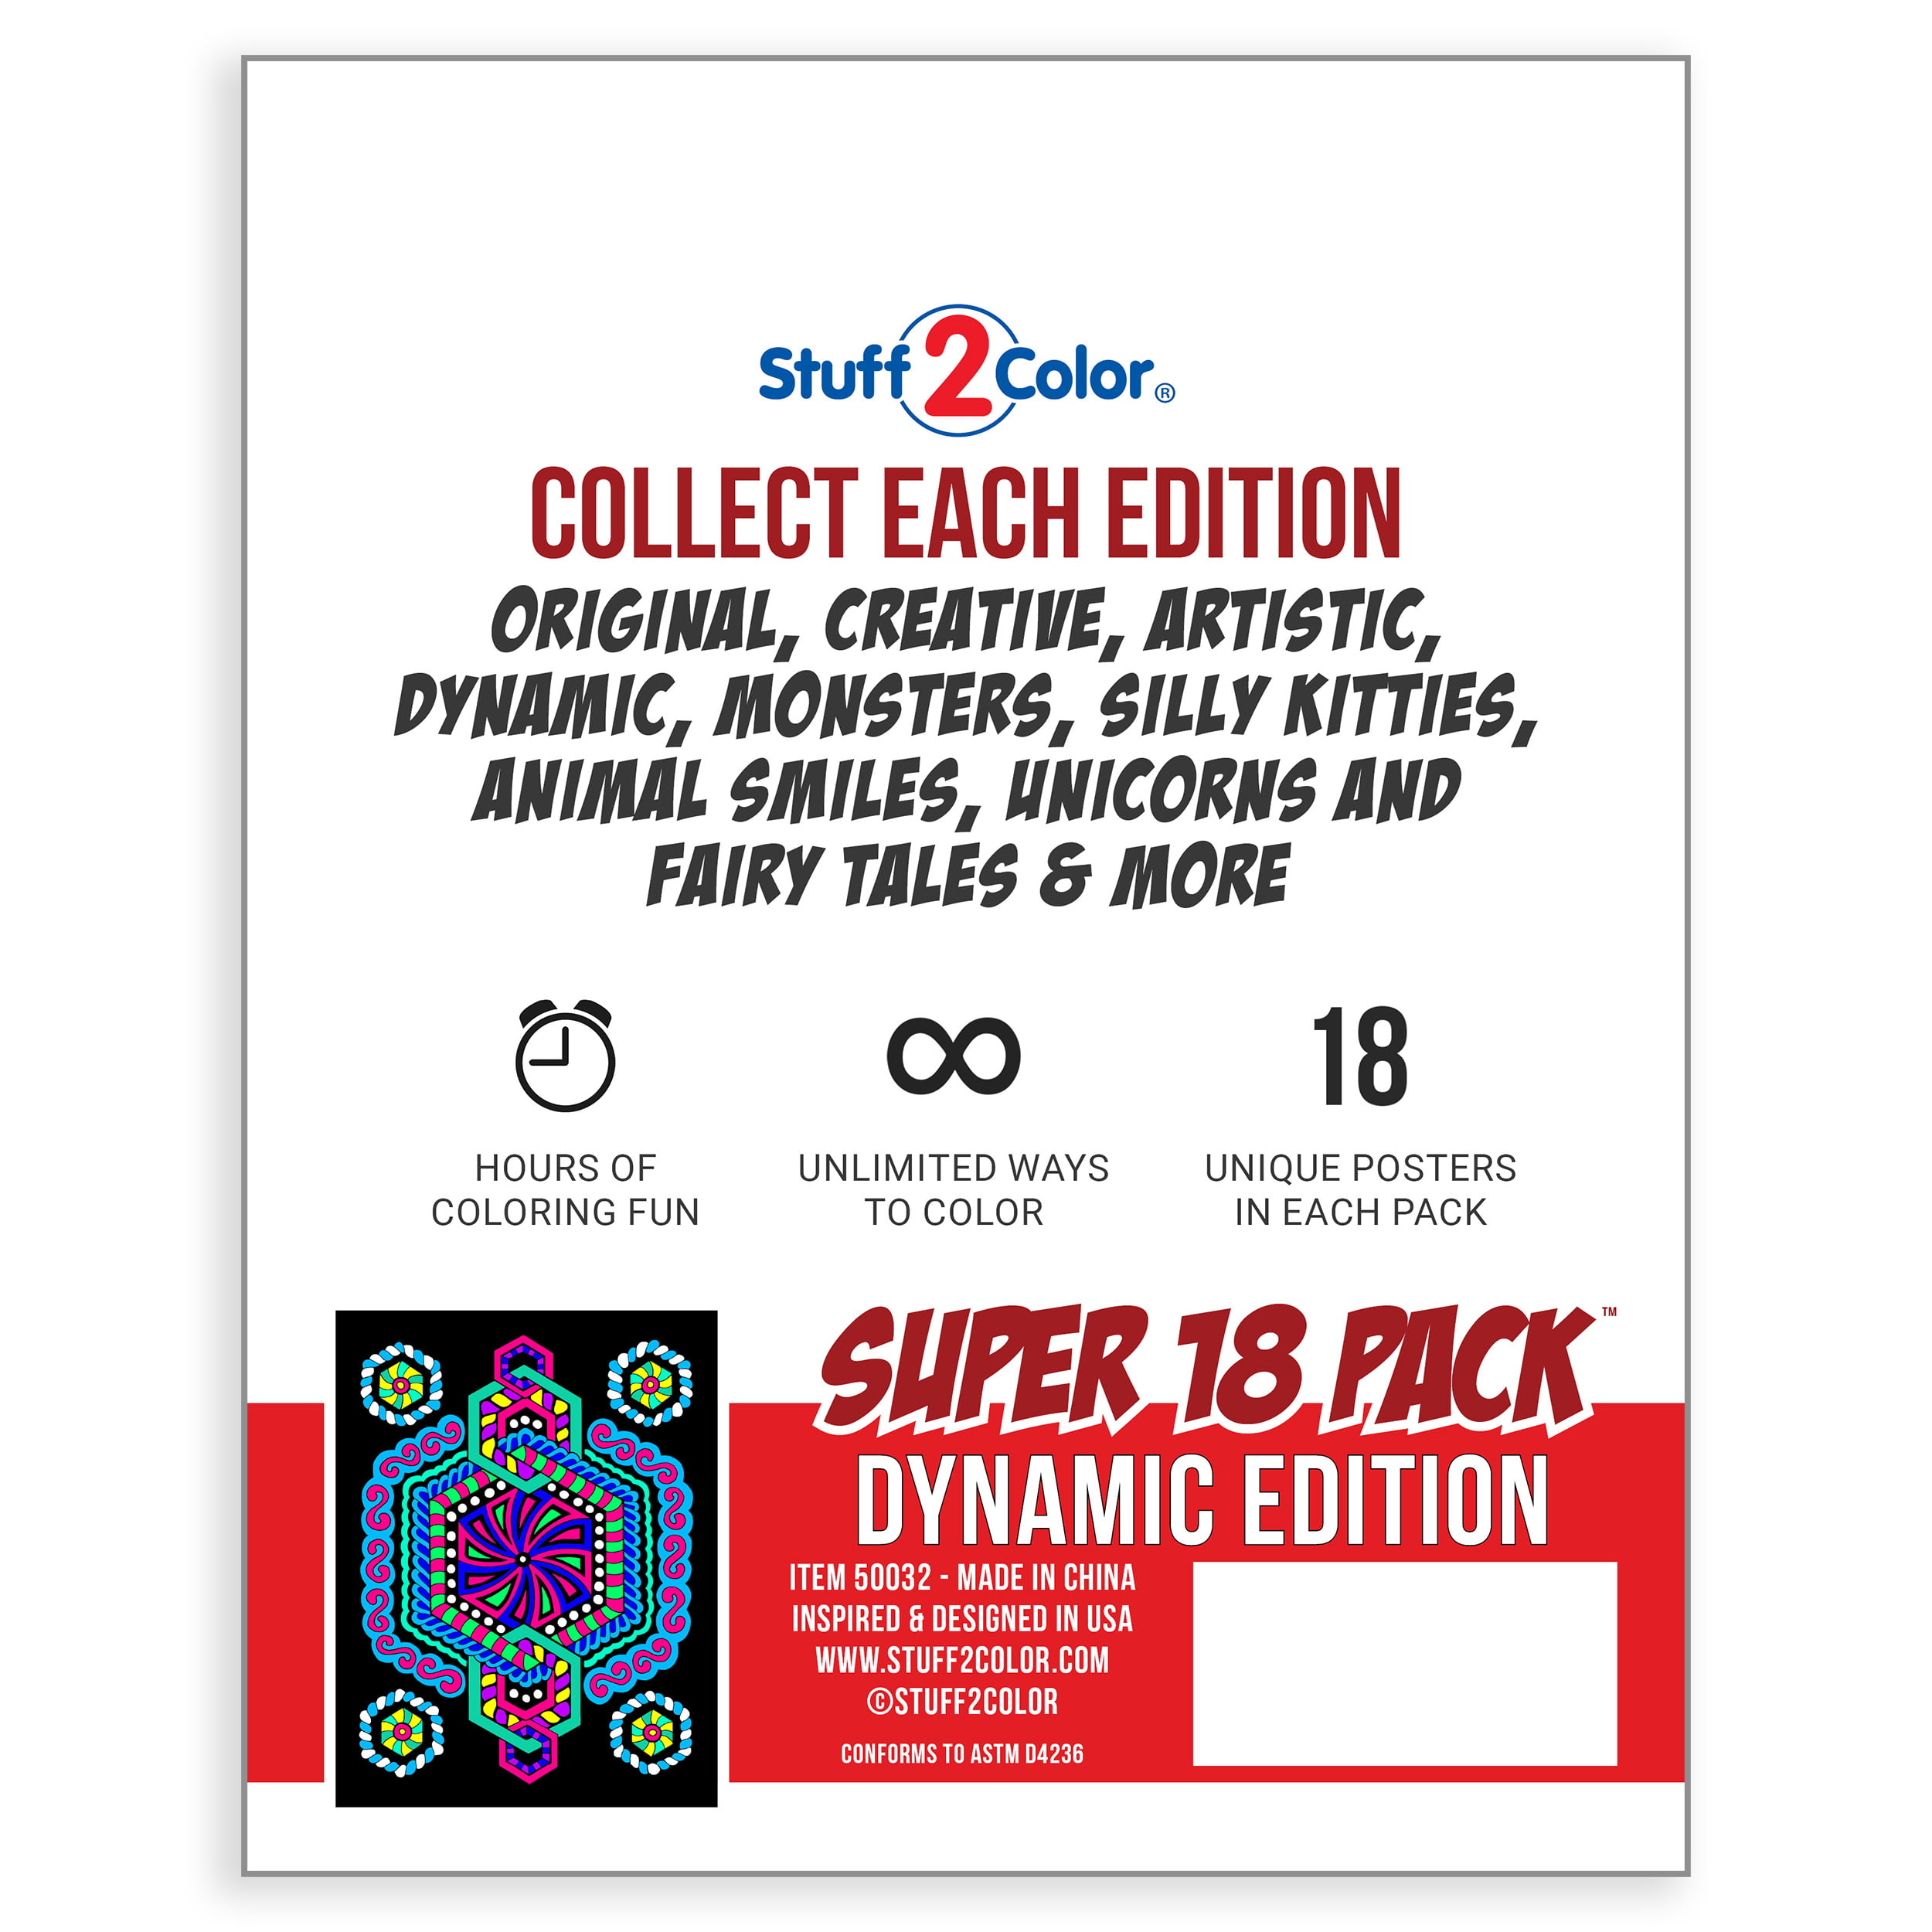 Super Pack of 18 Fuzzy Velvet 8X10 Inch Posters (Creative Edition) - China  Fuzzy Velvet 8X10 Inch Posters (Creative Editio and Velvet 8X10 Inch Posters  (Creative Edition) price